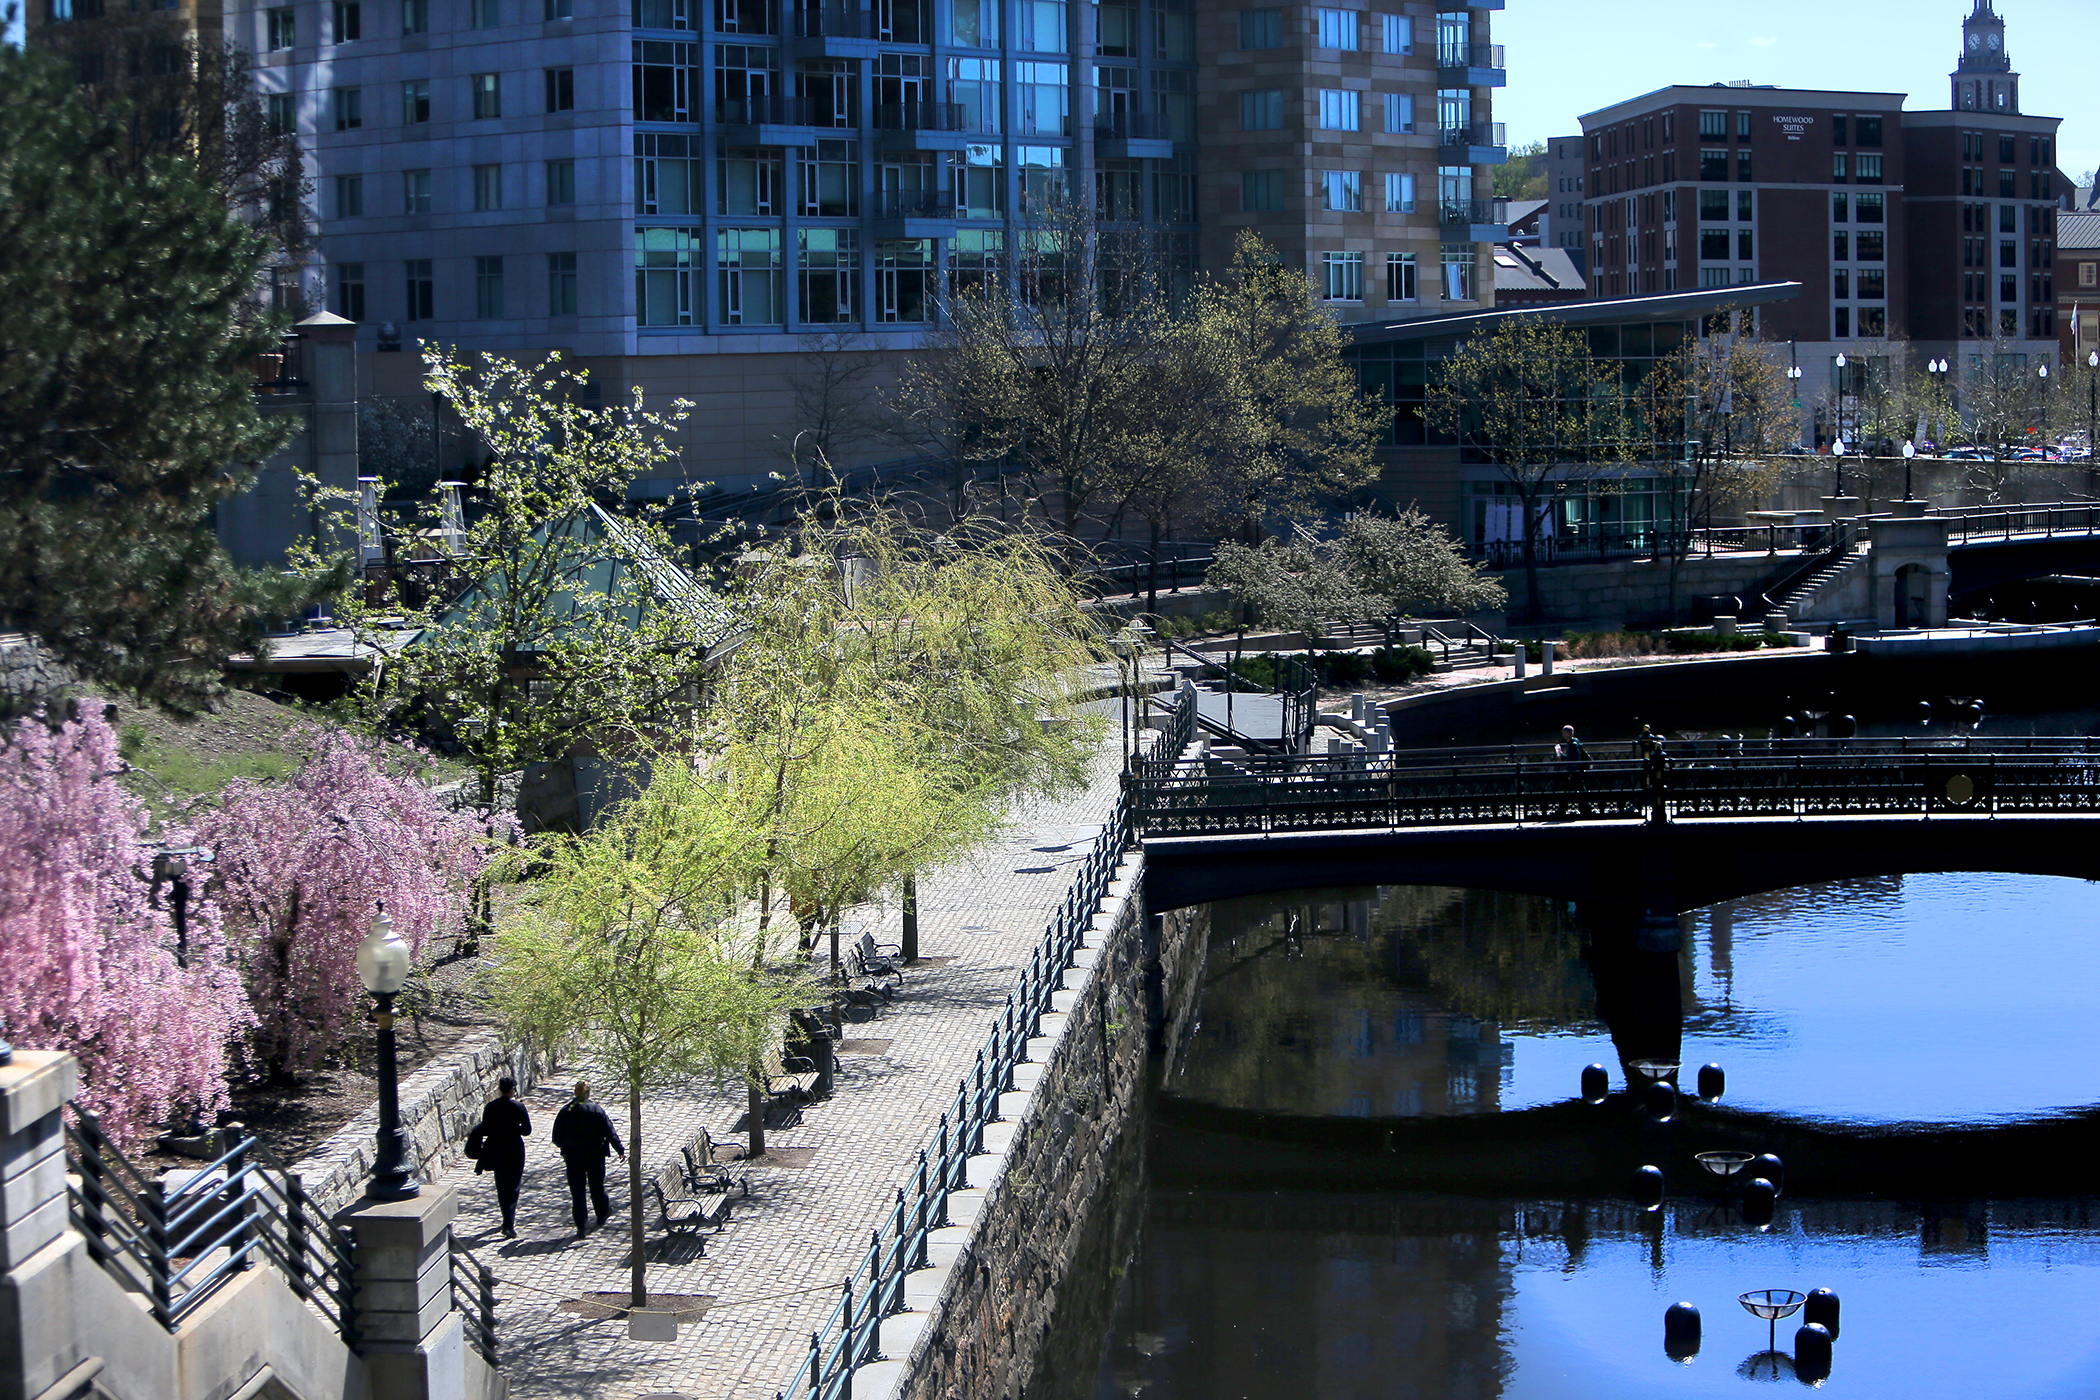 The Woonasquatucket River in downtown Providence, RI is pictured on April 25, 2019.